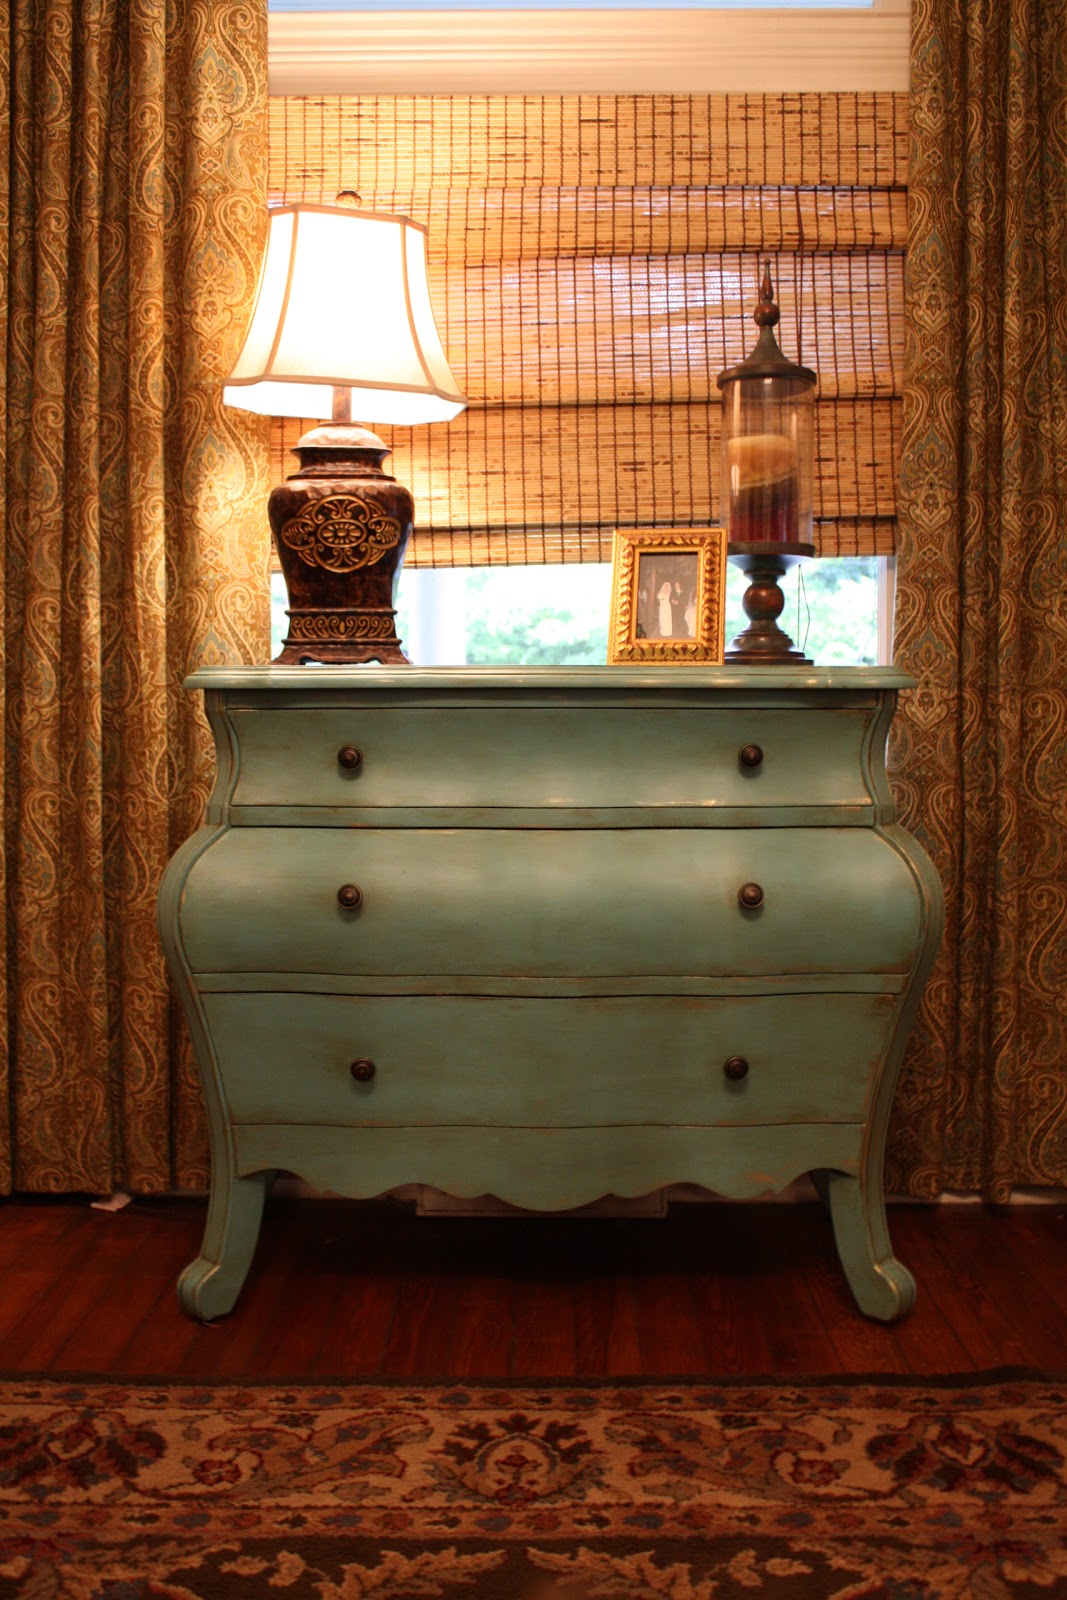 Remodelaholic | Painted Antique Furniture Chest: Guest Remodel